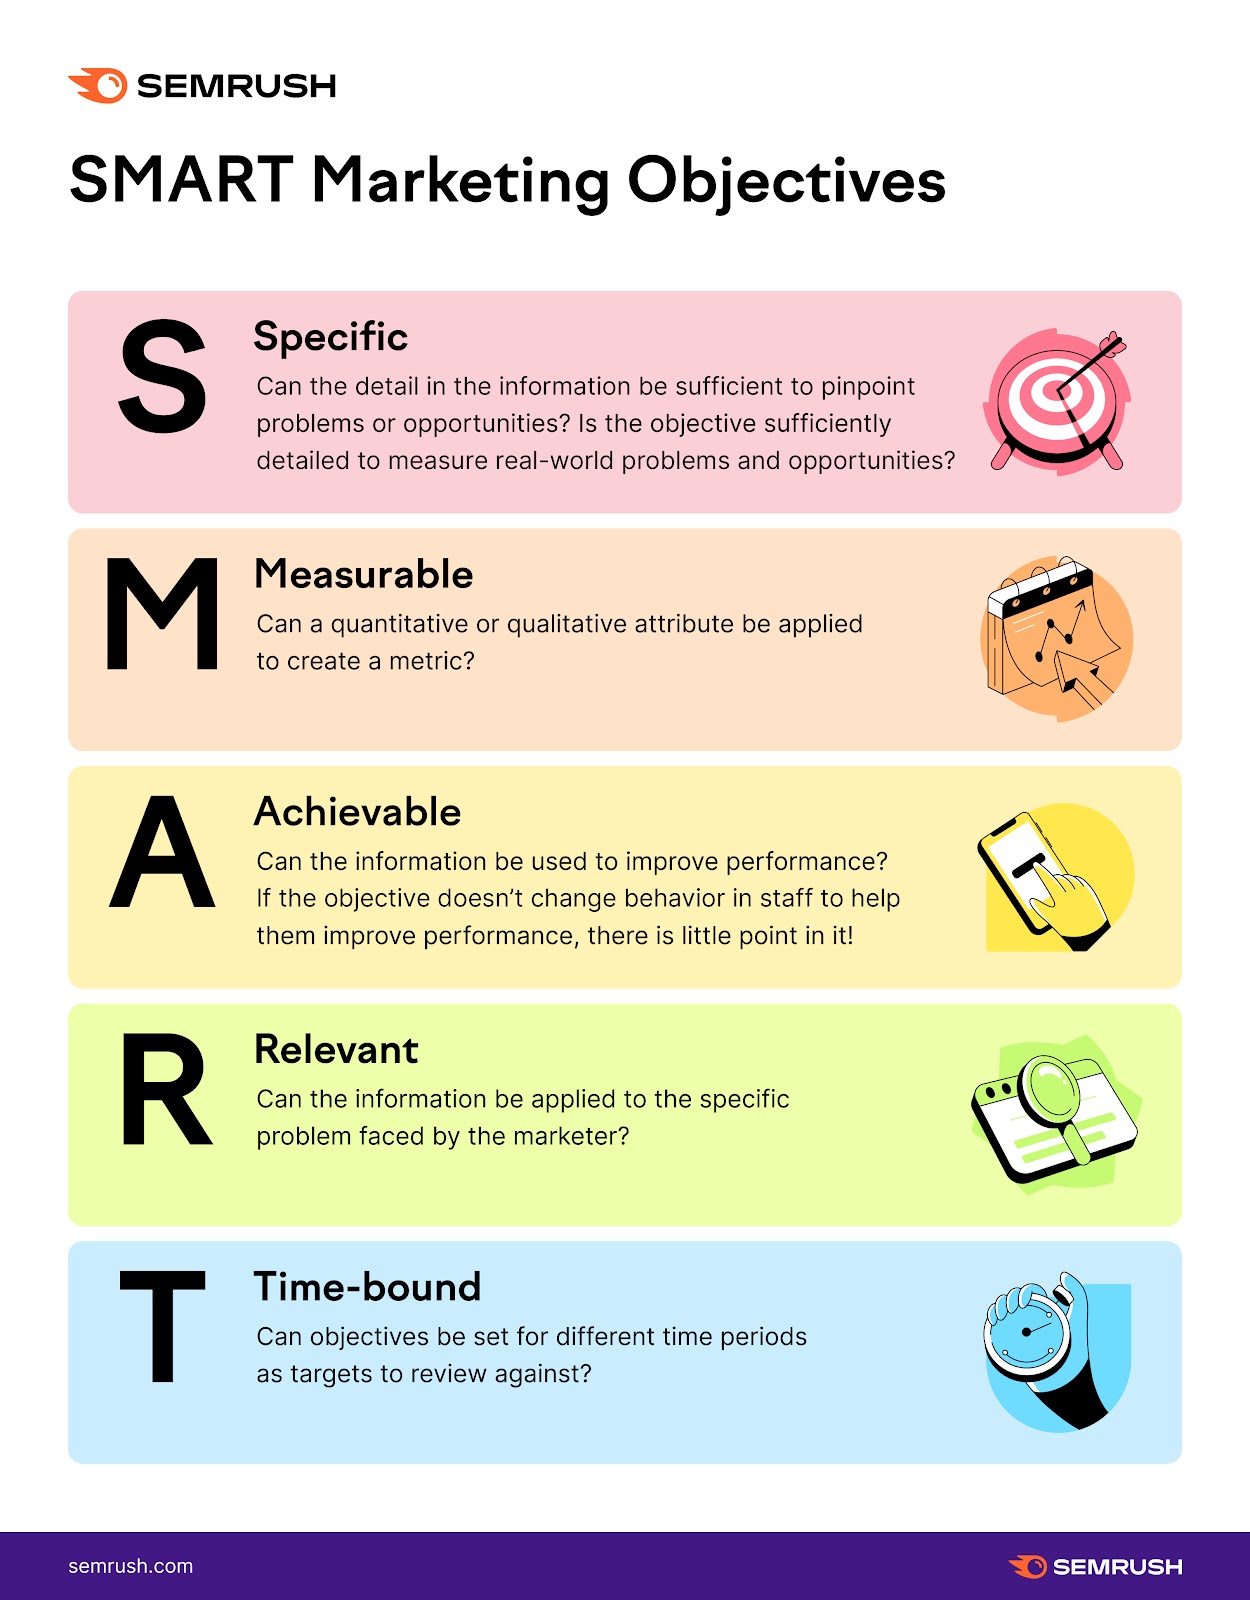 Semrush infographic showing questions the user can respond to in order to have "SMART" marketing objectives.